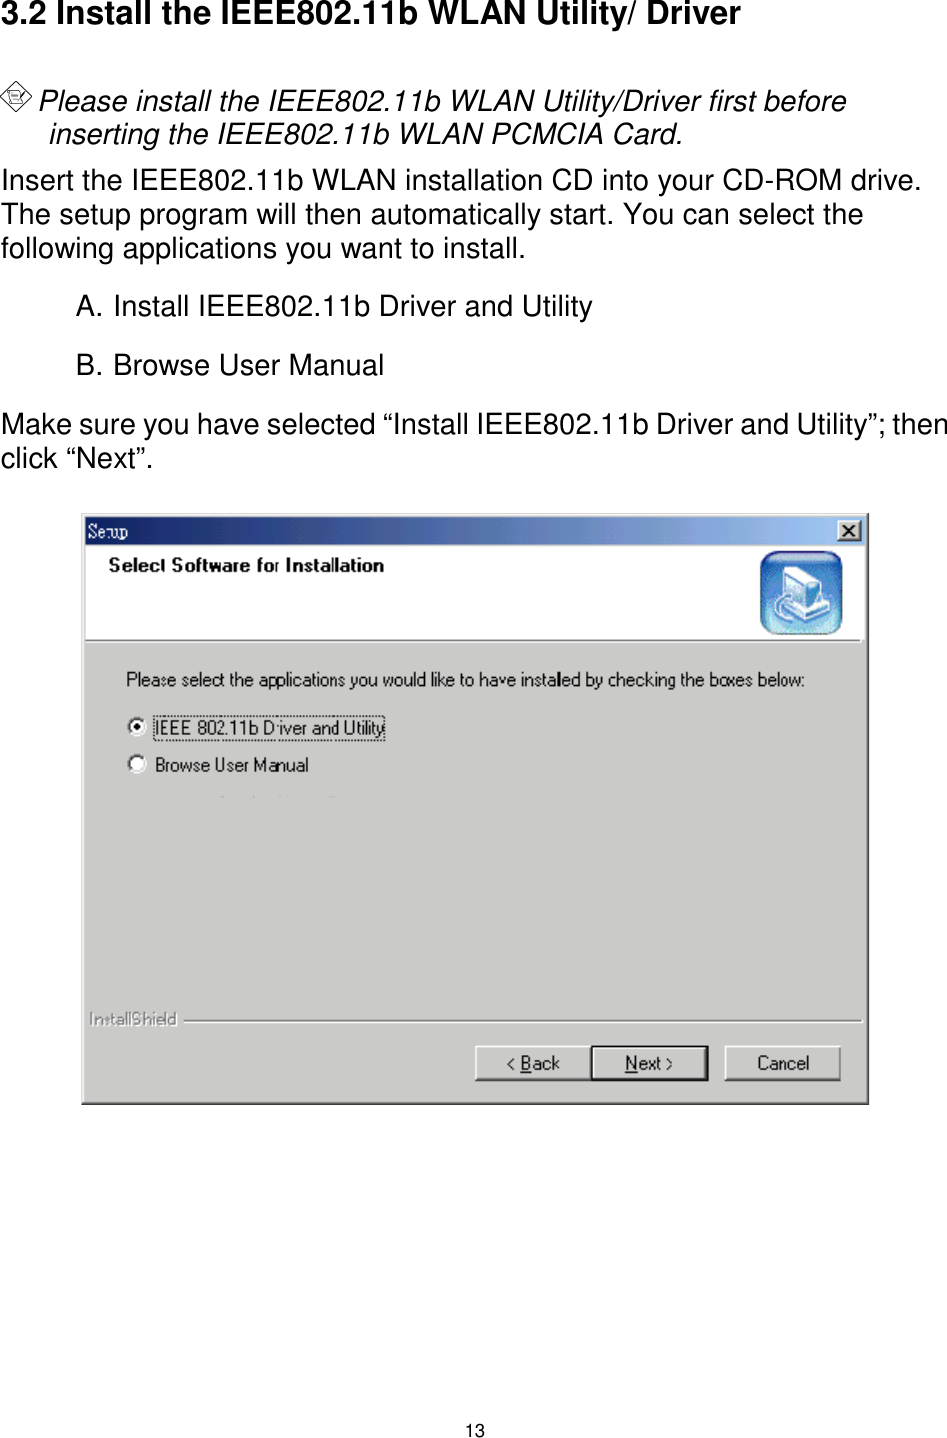  13  3.2 Install the IEEE802.11b WLAN Utility/ Driver   Please install the IEEE802.11b WLAN Utility/Driver first before inserting the IEEE802.11b WLAN PCMCIA Card. Insert the IEEE802.11b WLAN installation CD into your CD-ROM drive.  The setup program will then automatically start. You can select the following applications you want to install. A. Install IEEE802.11b Driver and Utility B. Browse User Manual Make sure you have selected “Install IEEE802.11b Driver and Utility”; then click “Next”.                        